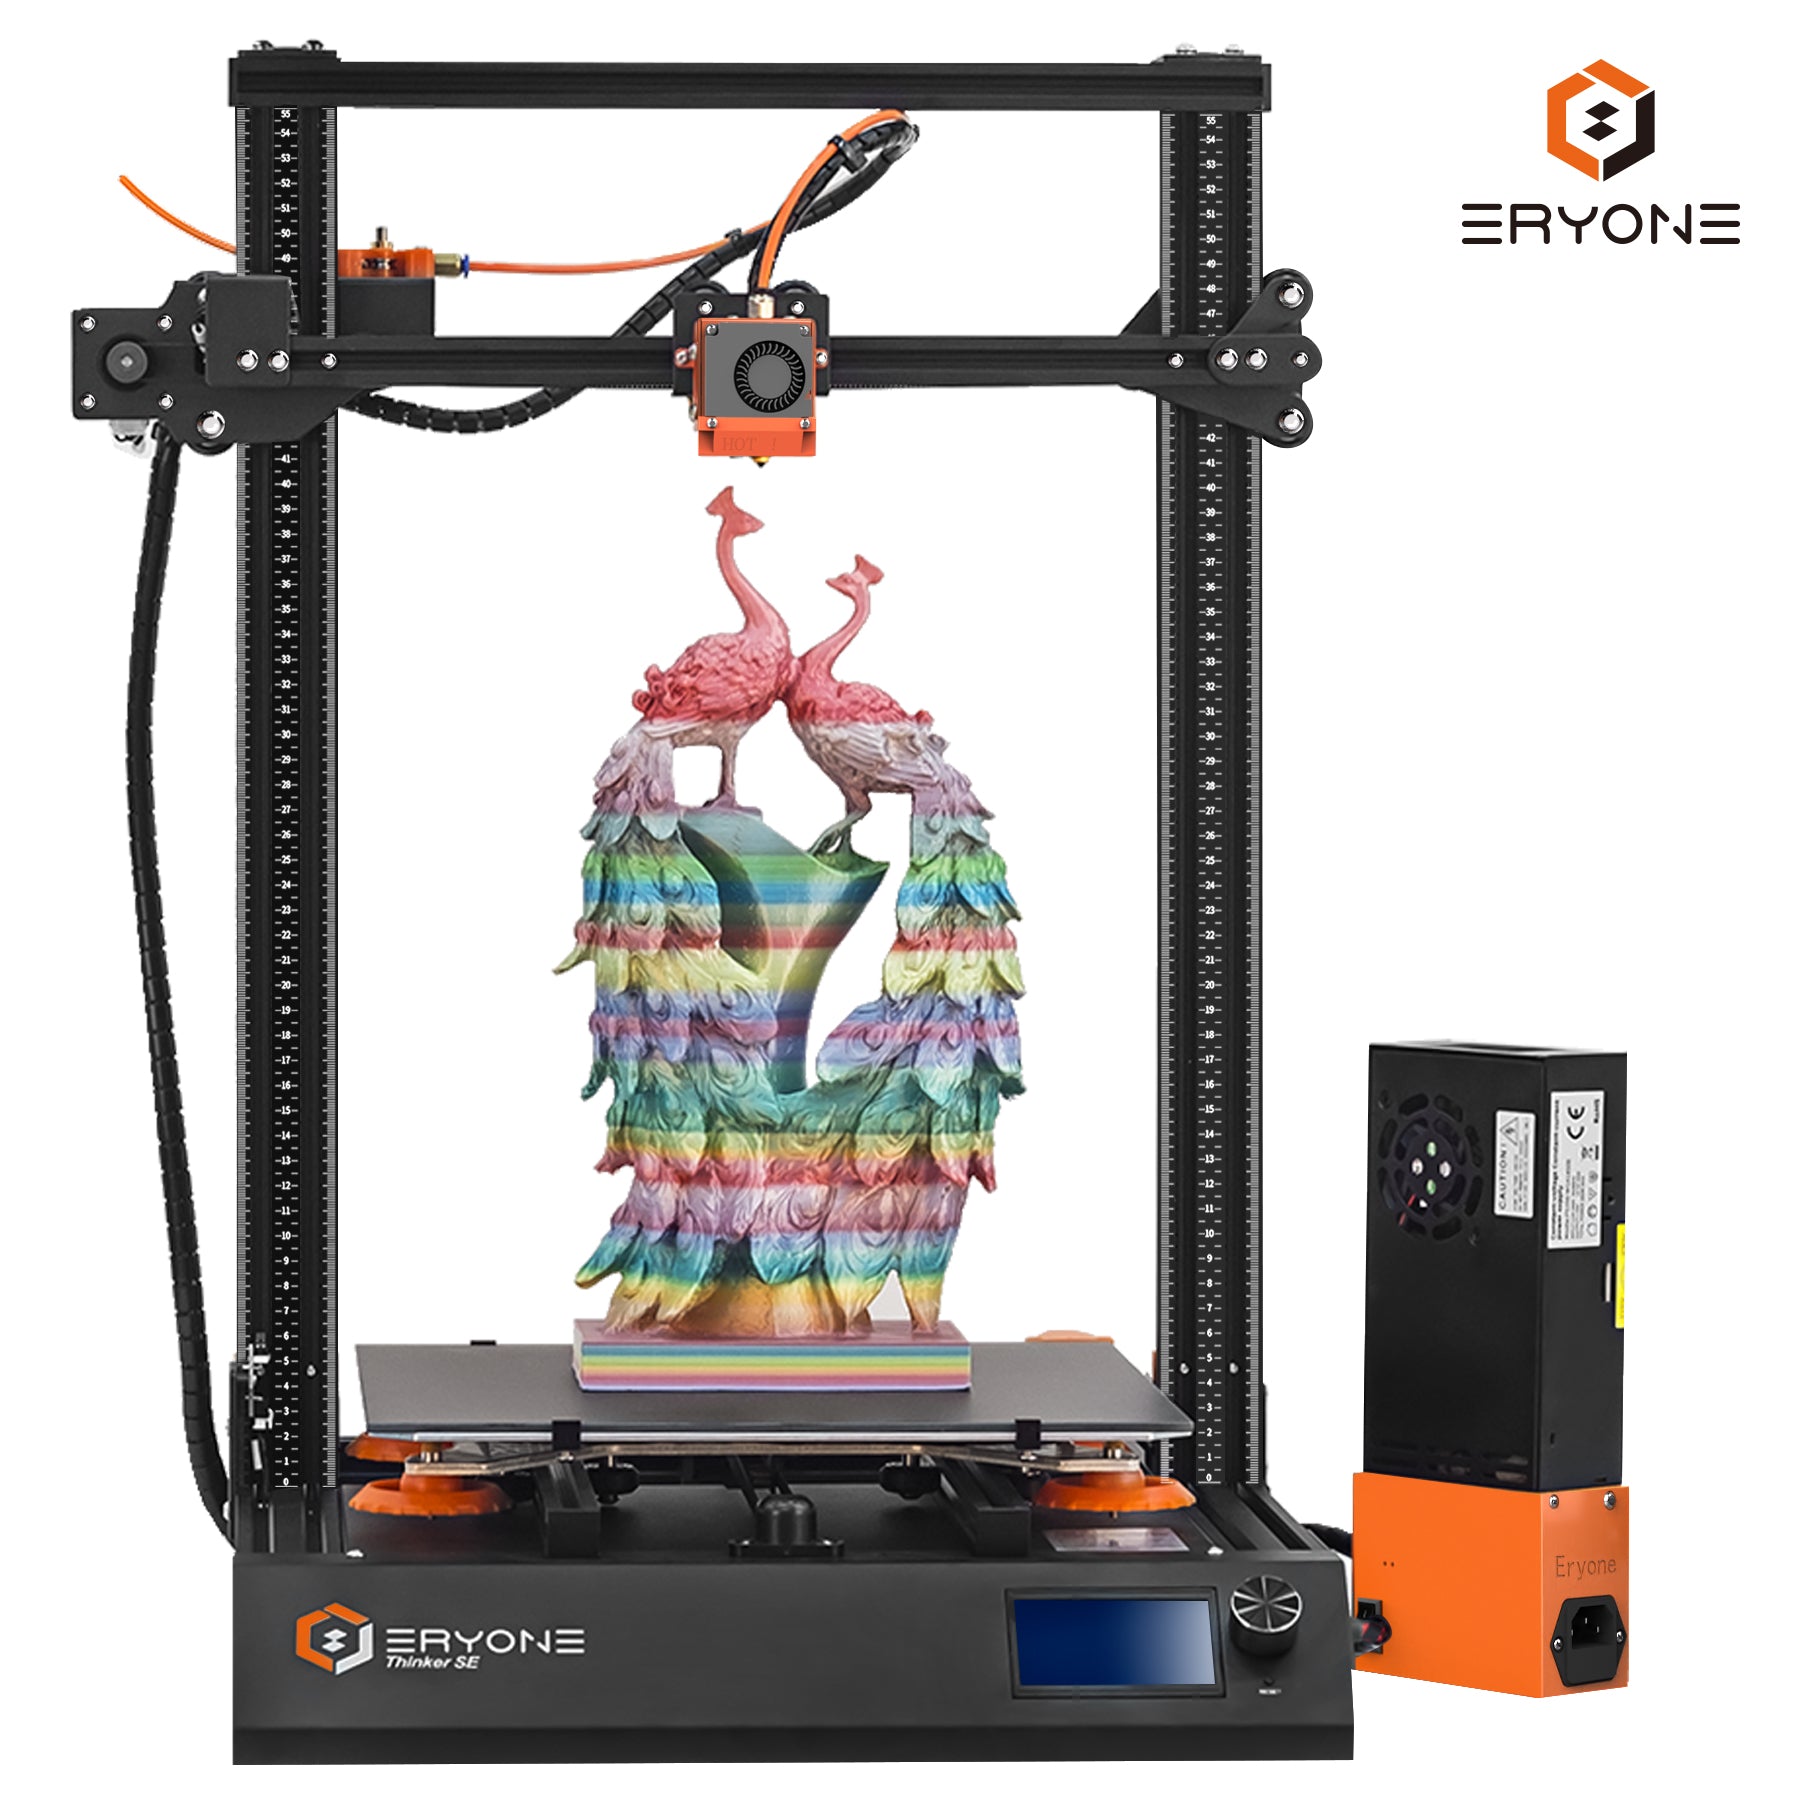 High Performance Auto Bed Leveling 3d Printer - ERYONE